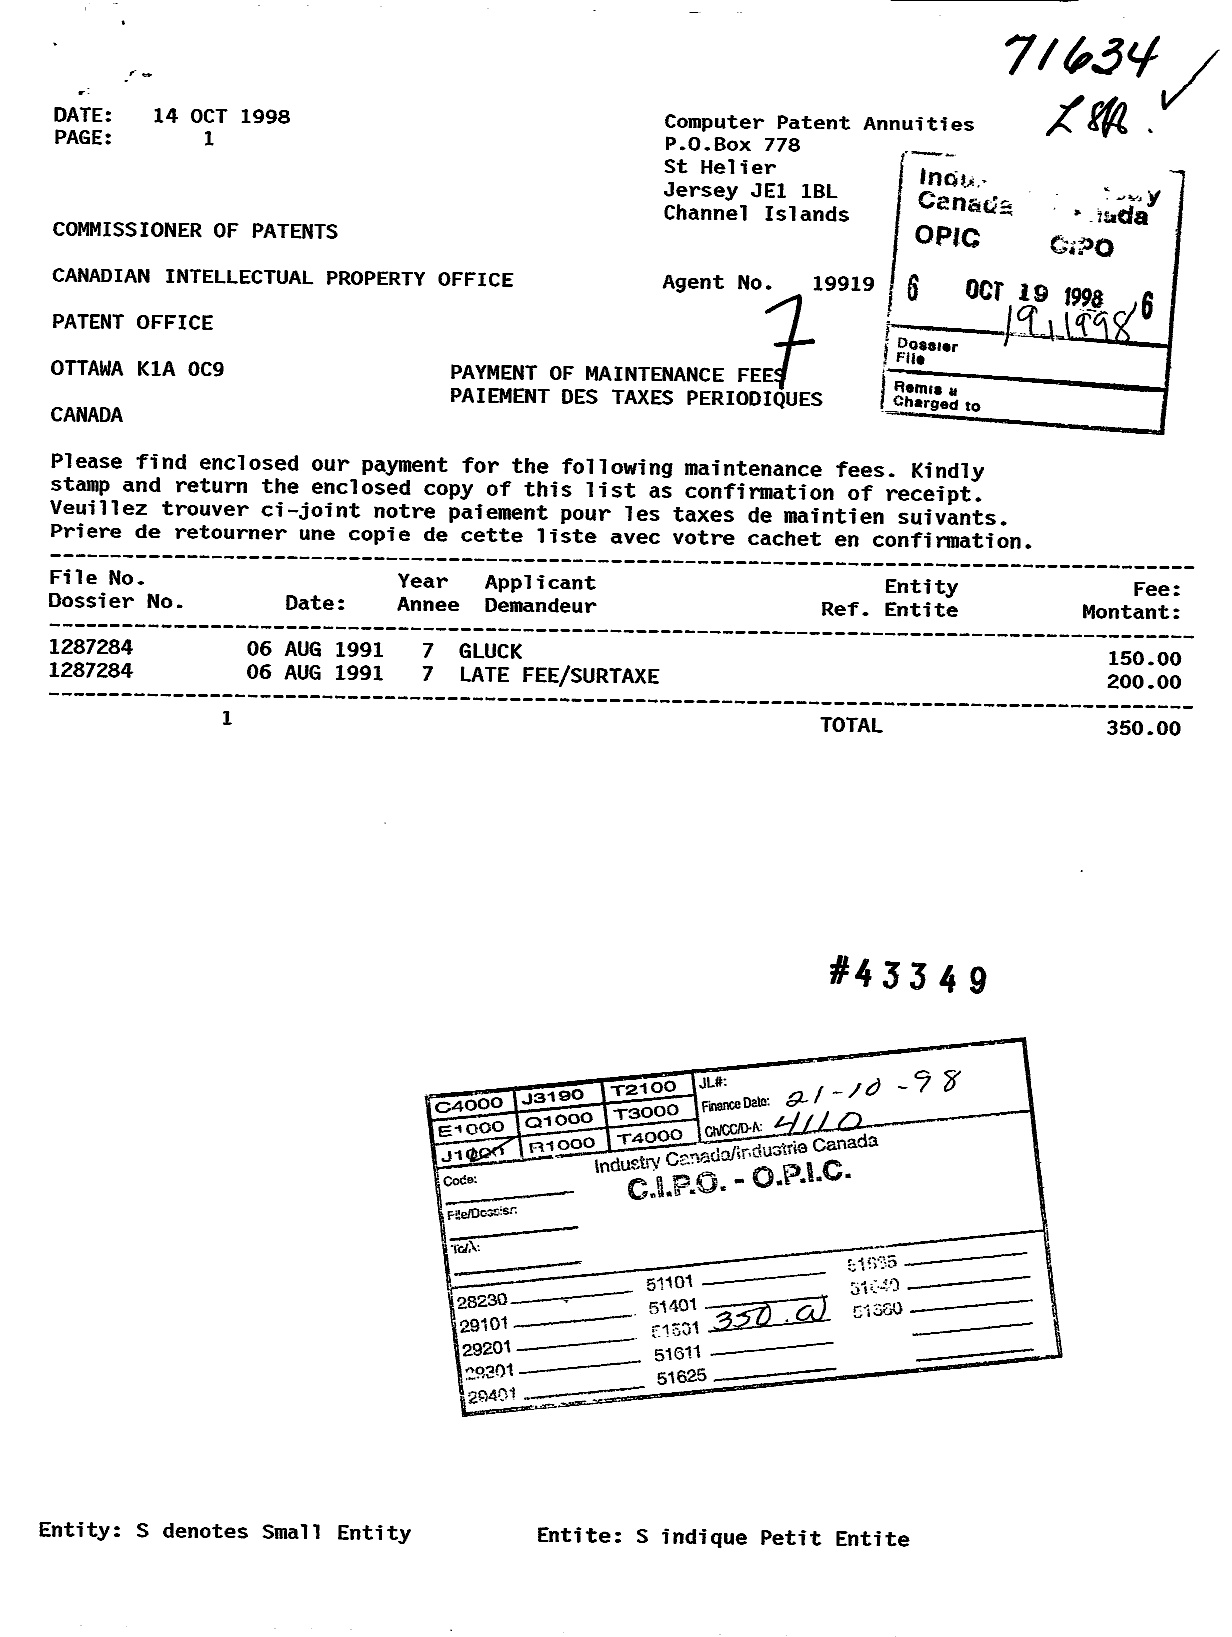 Canadian Patent Document 1287284. Fees 19981019. Image 1 of 1